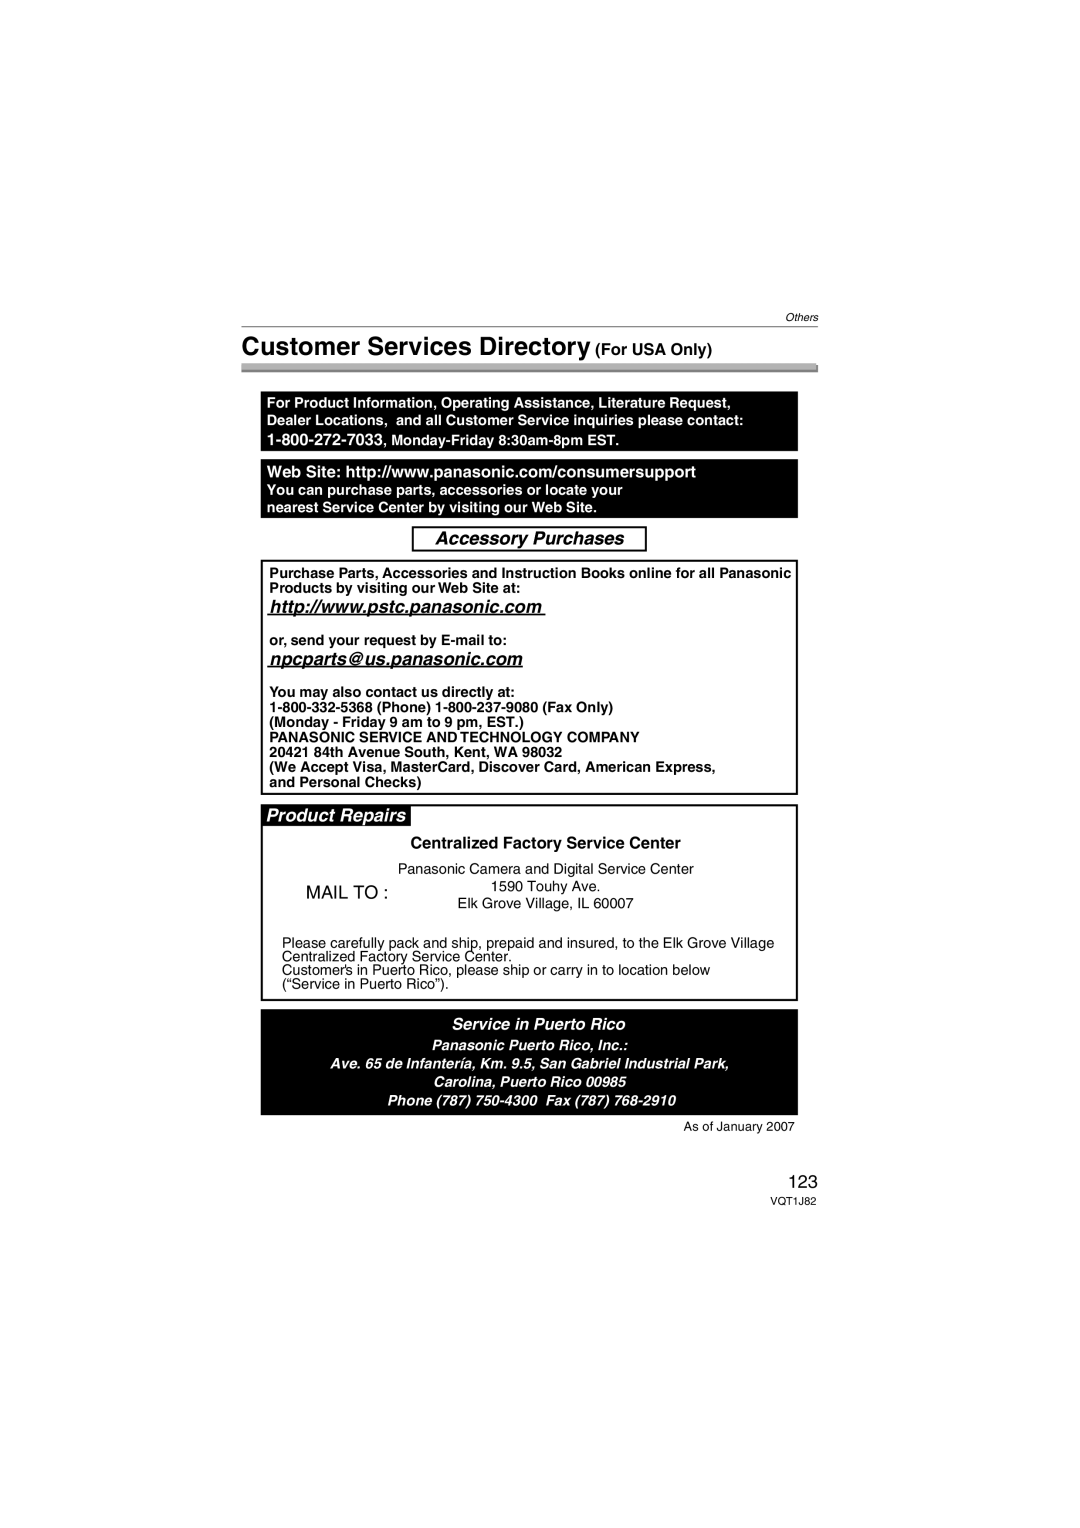 Panasonic DMC-FX33 Customer Services Directory For USA Only, Mail To, Centralized Factory Service Center, Product Repairs 